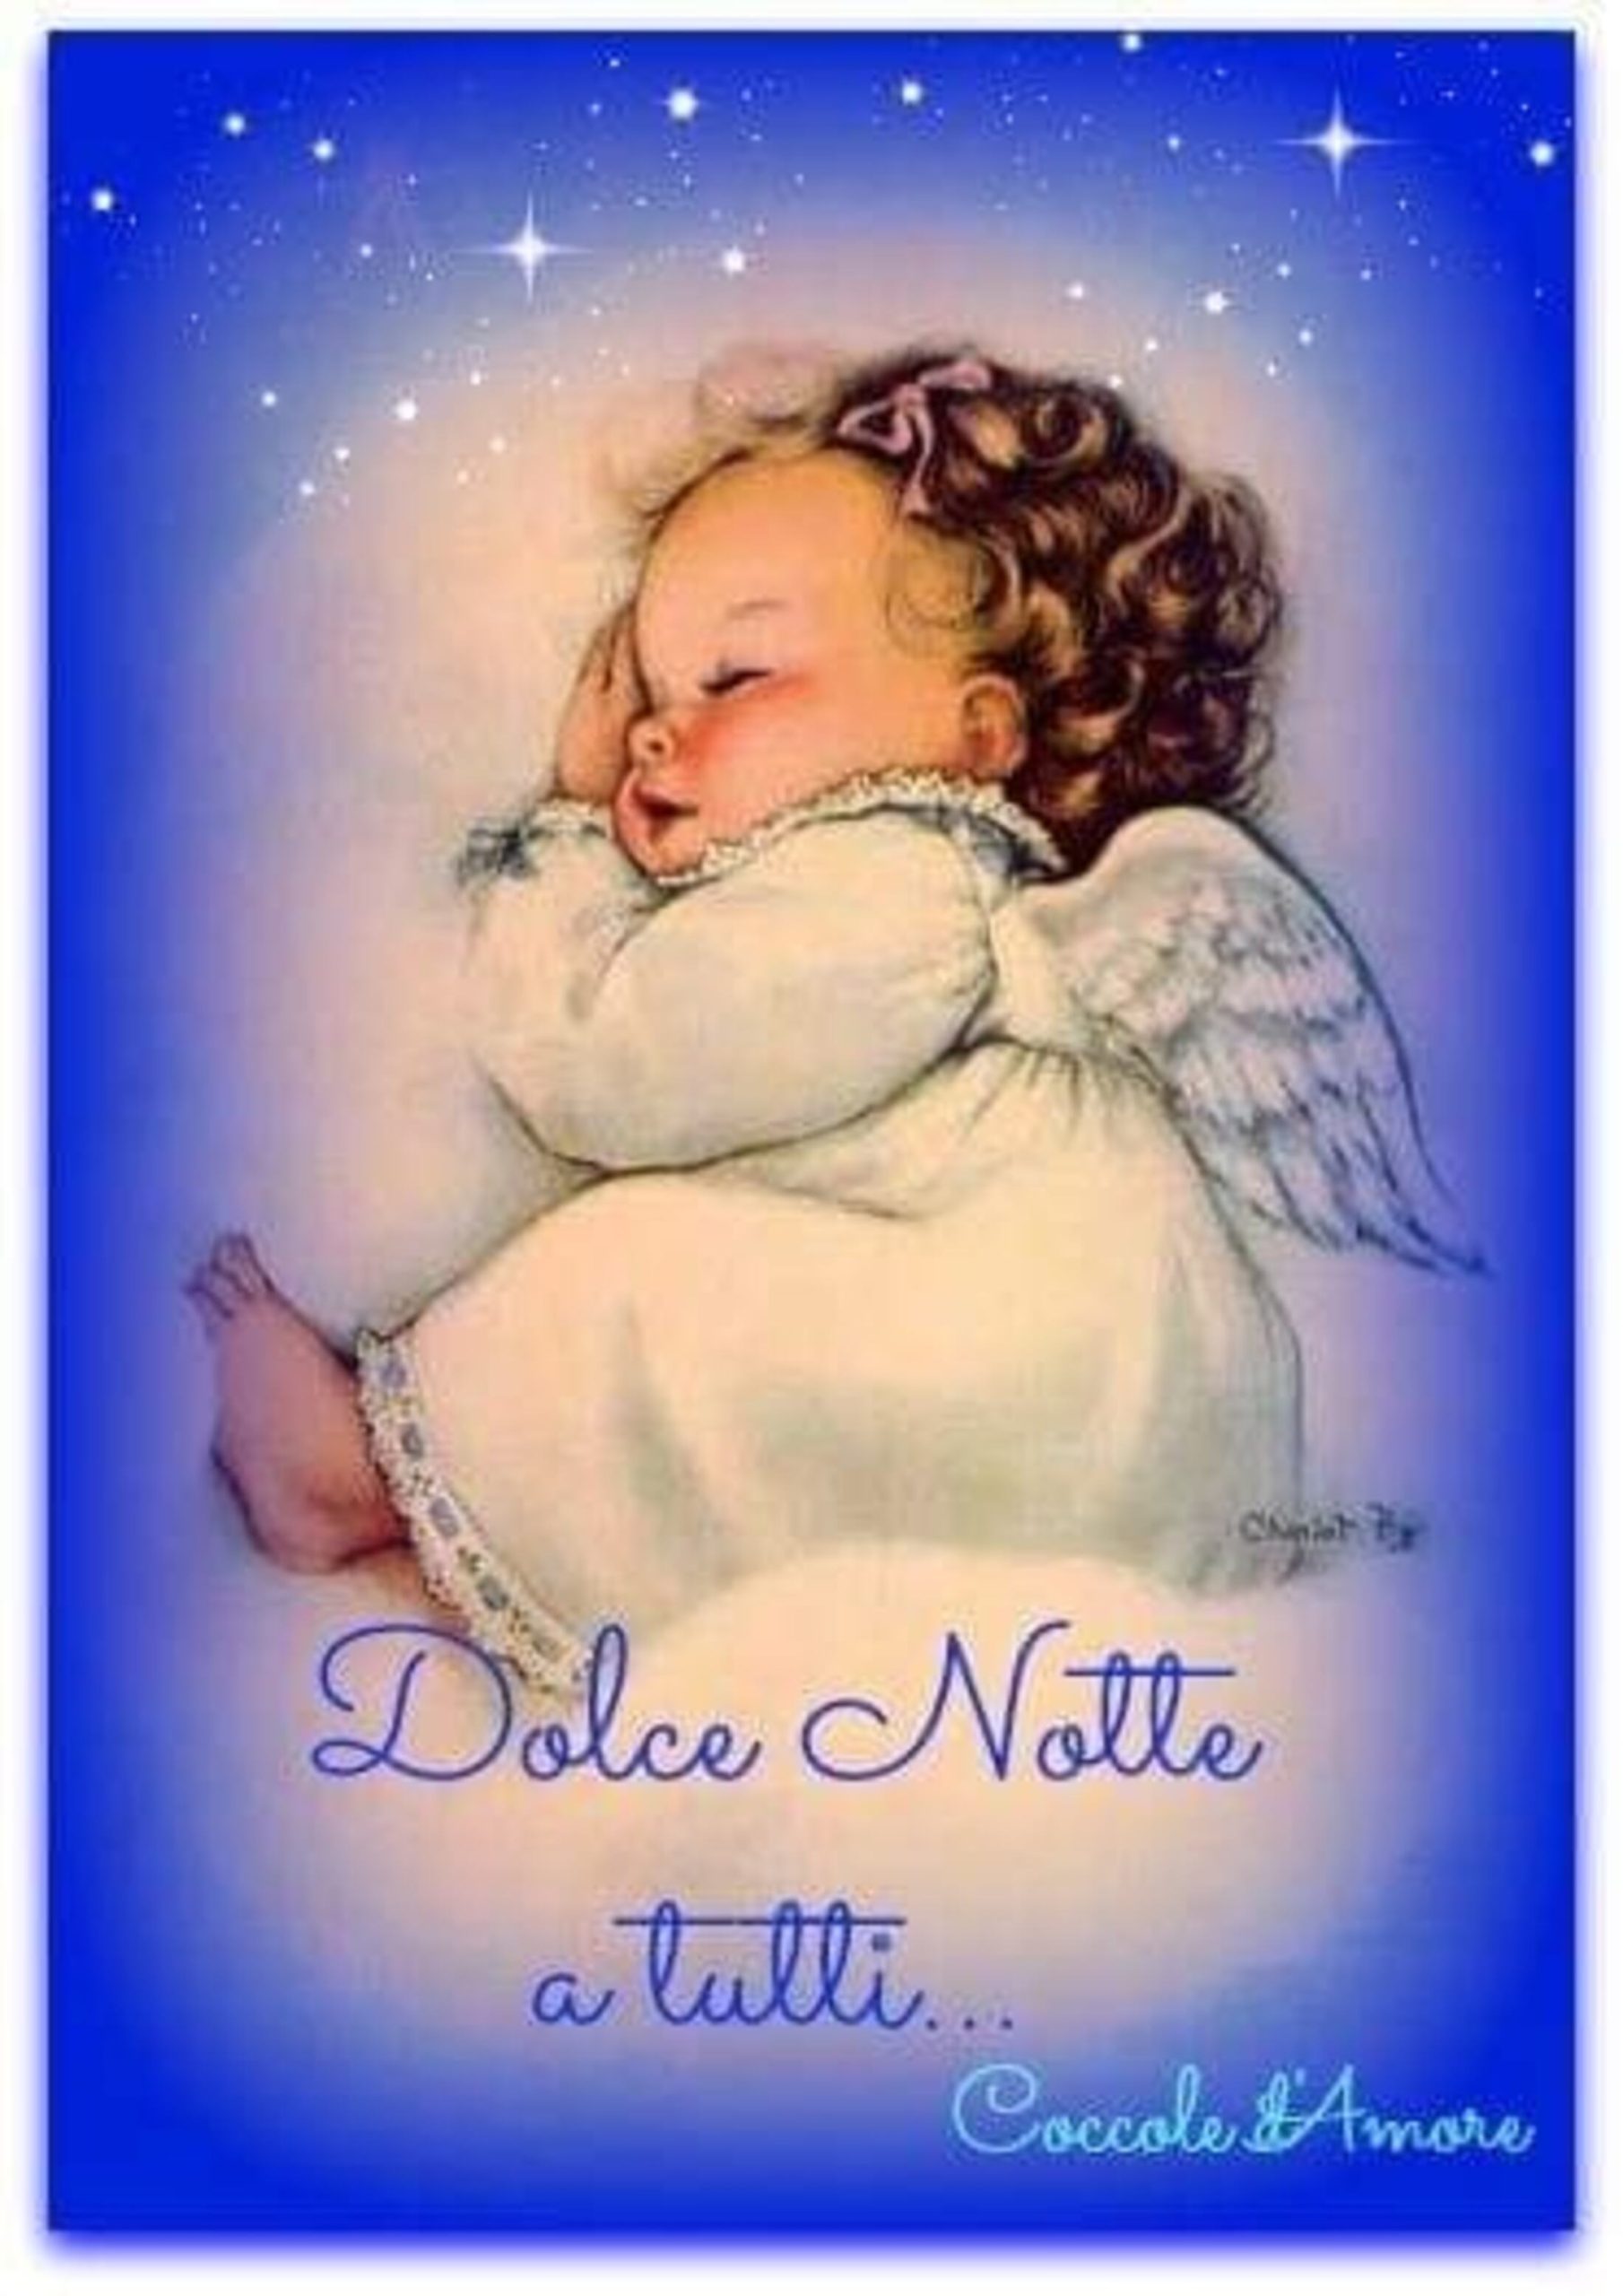 Dolce Notte a tutti angioletto